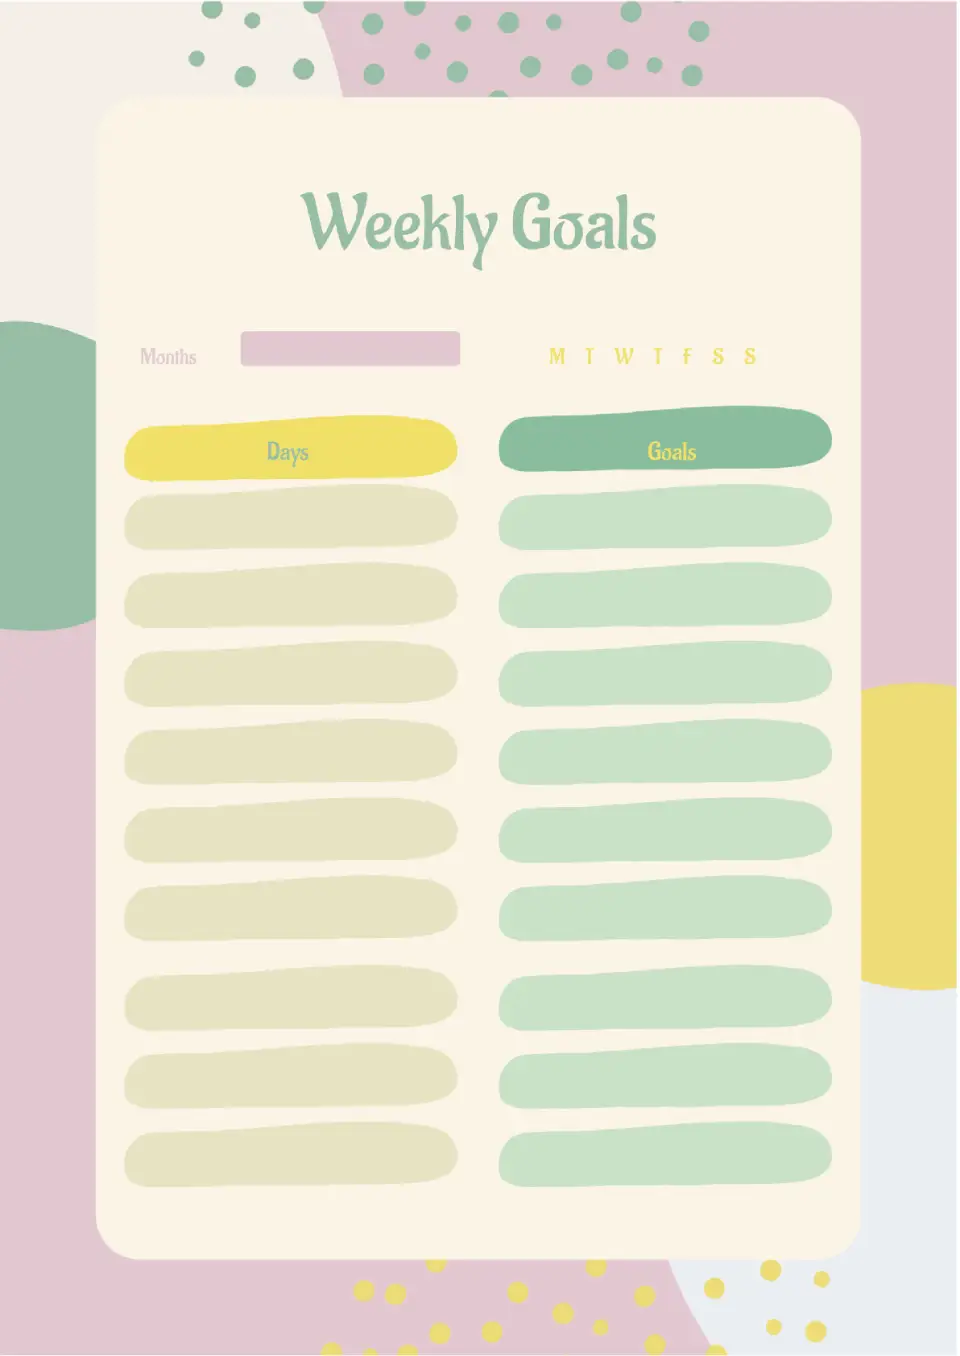 Weekly Goals Template for Google Docs